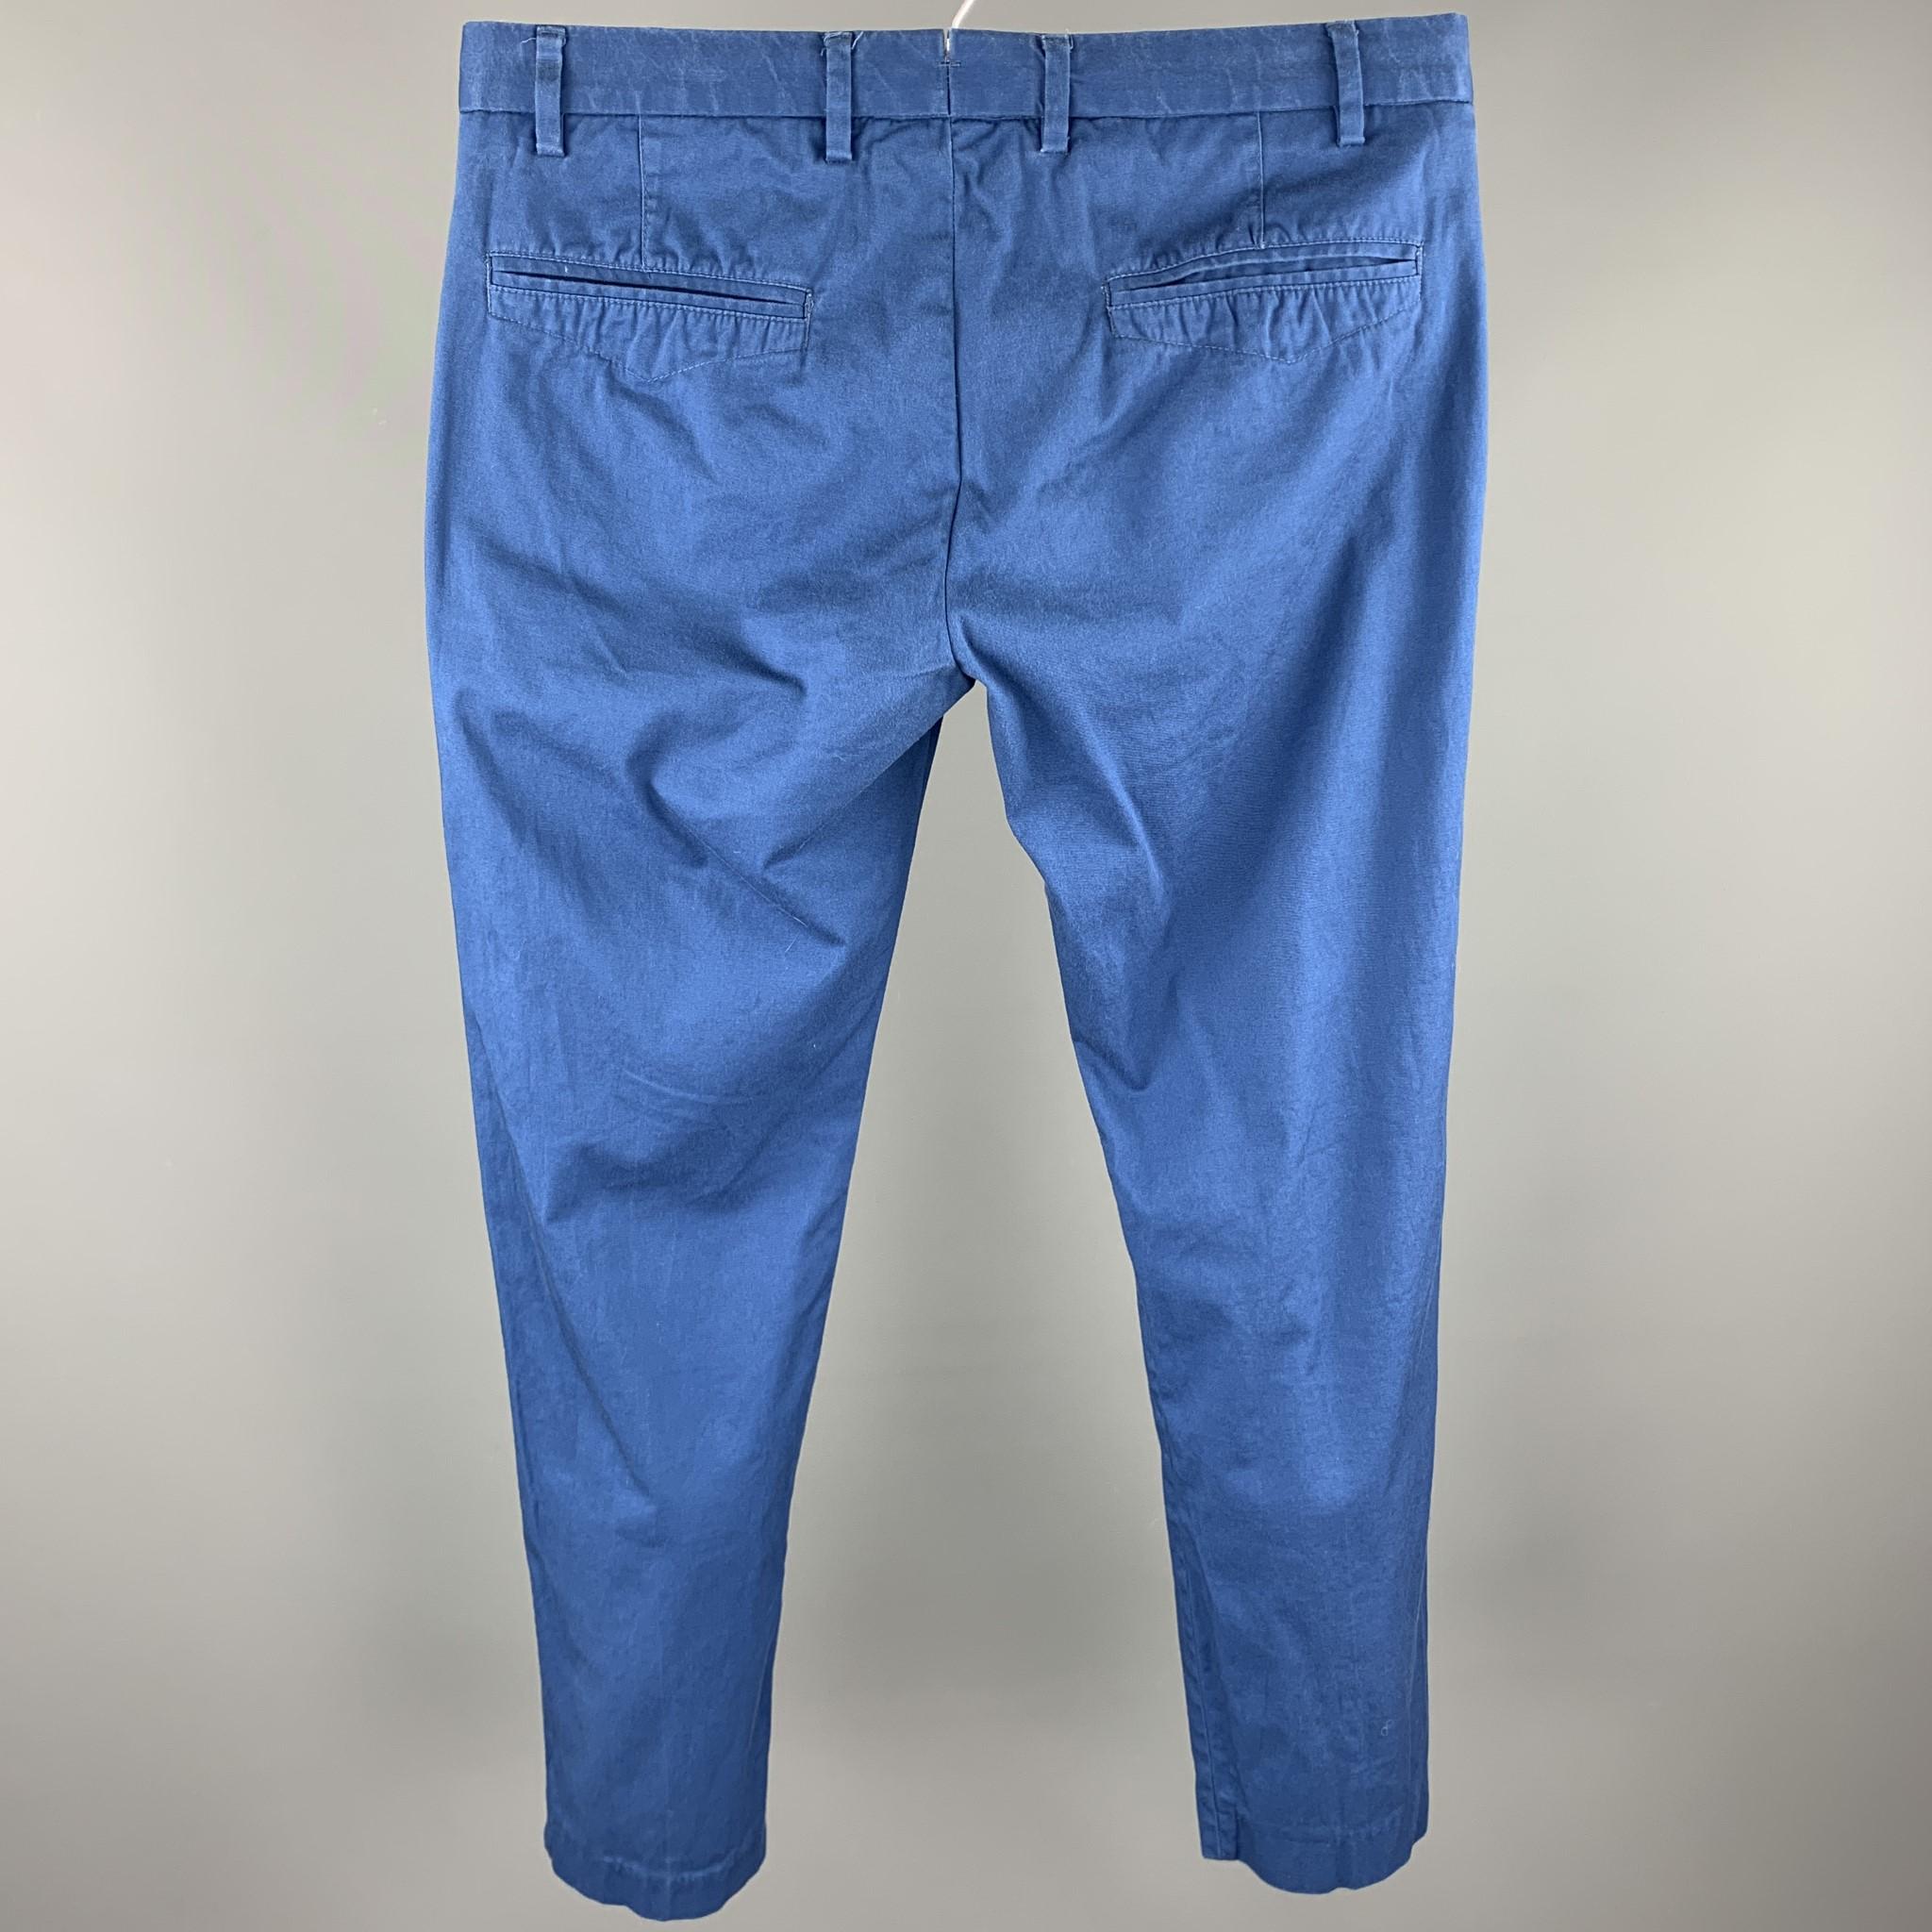 EREDI PISANO casual pants comes in a blue cotton / elastane featuring a slim fit and a zip fly closure.
 

Very Good Pre-Owned Condition.
Marked: 46

Measurements:

Waist: 32 in. 
Rise: 8 in. 
Inseam: 27 in. 